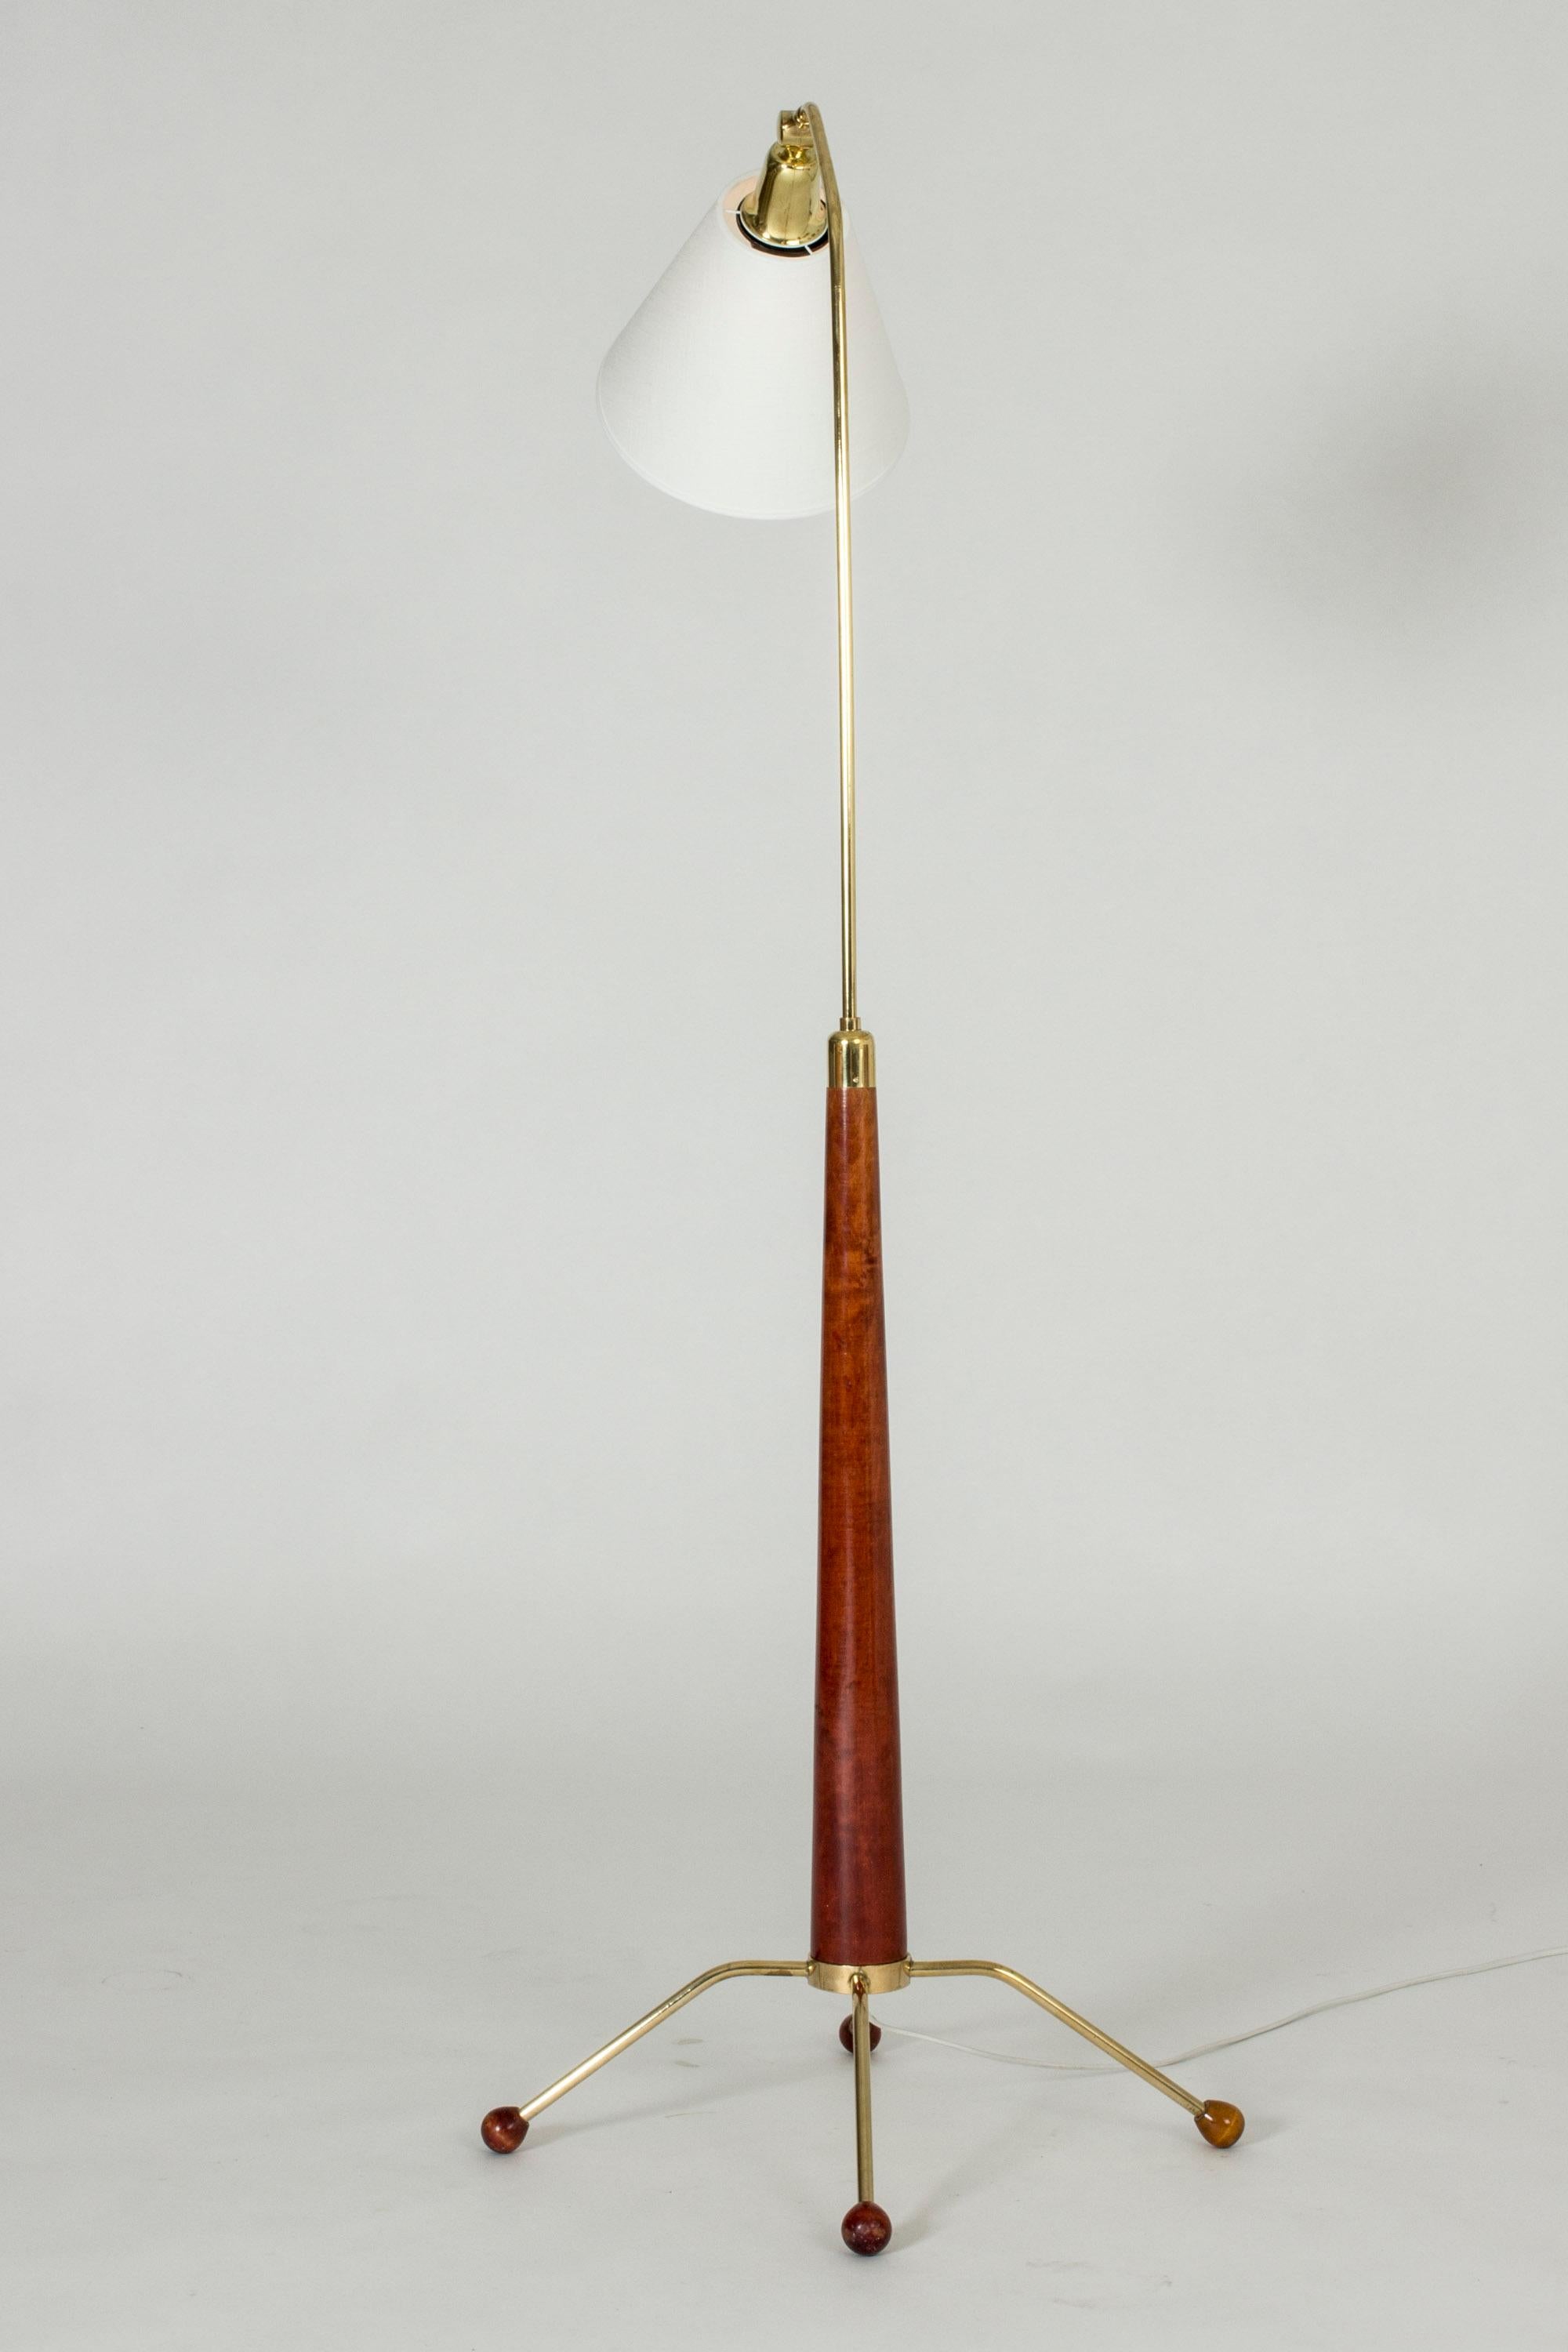 Cool floor lamp from Uppsala Armatur, made from brass with wooden details. Four feet with decorative, round chunky feet.